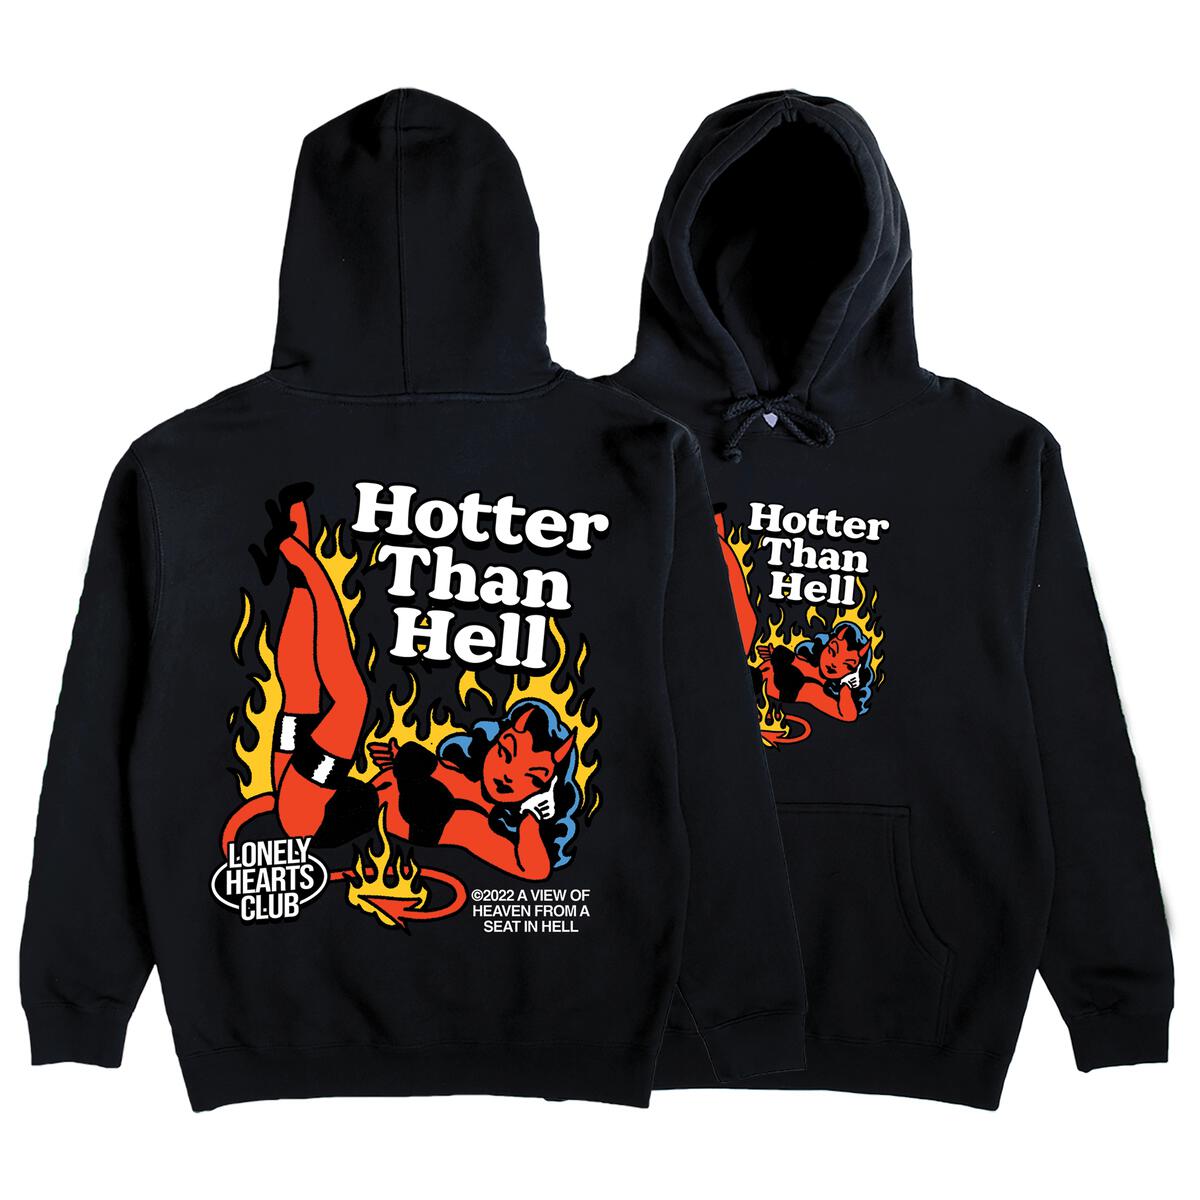 Lonely Hearts Hotter than Hell Hoodie Black